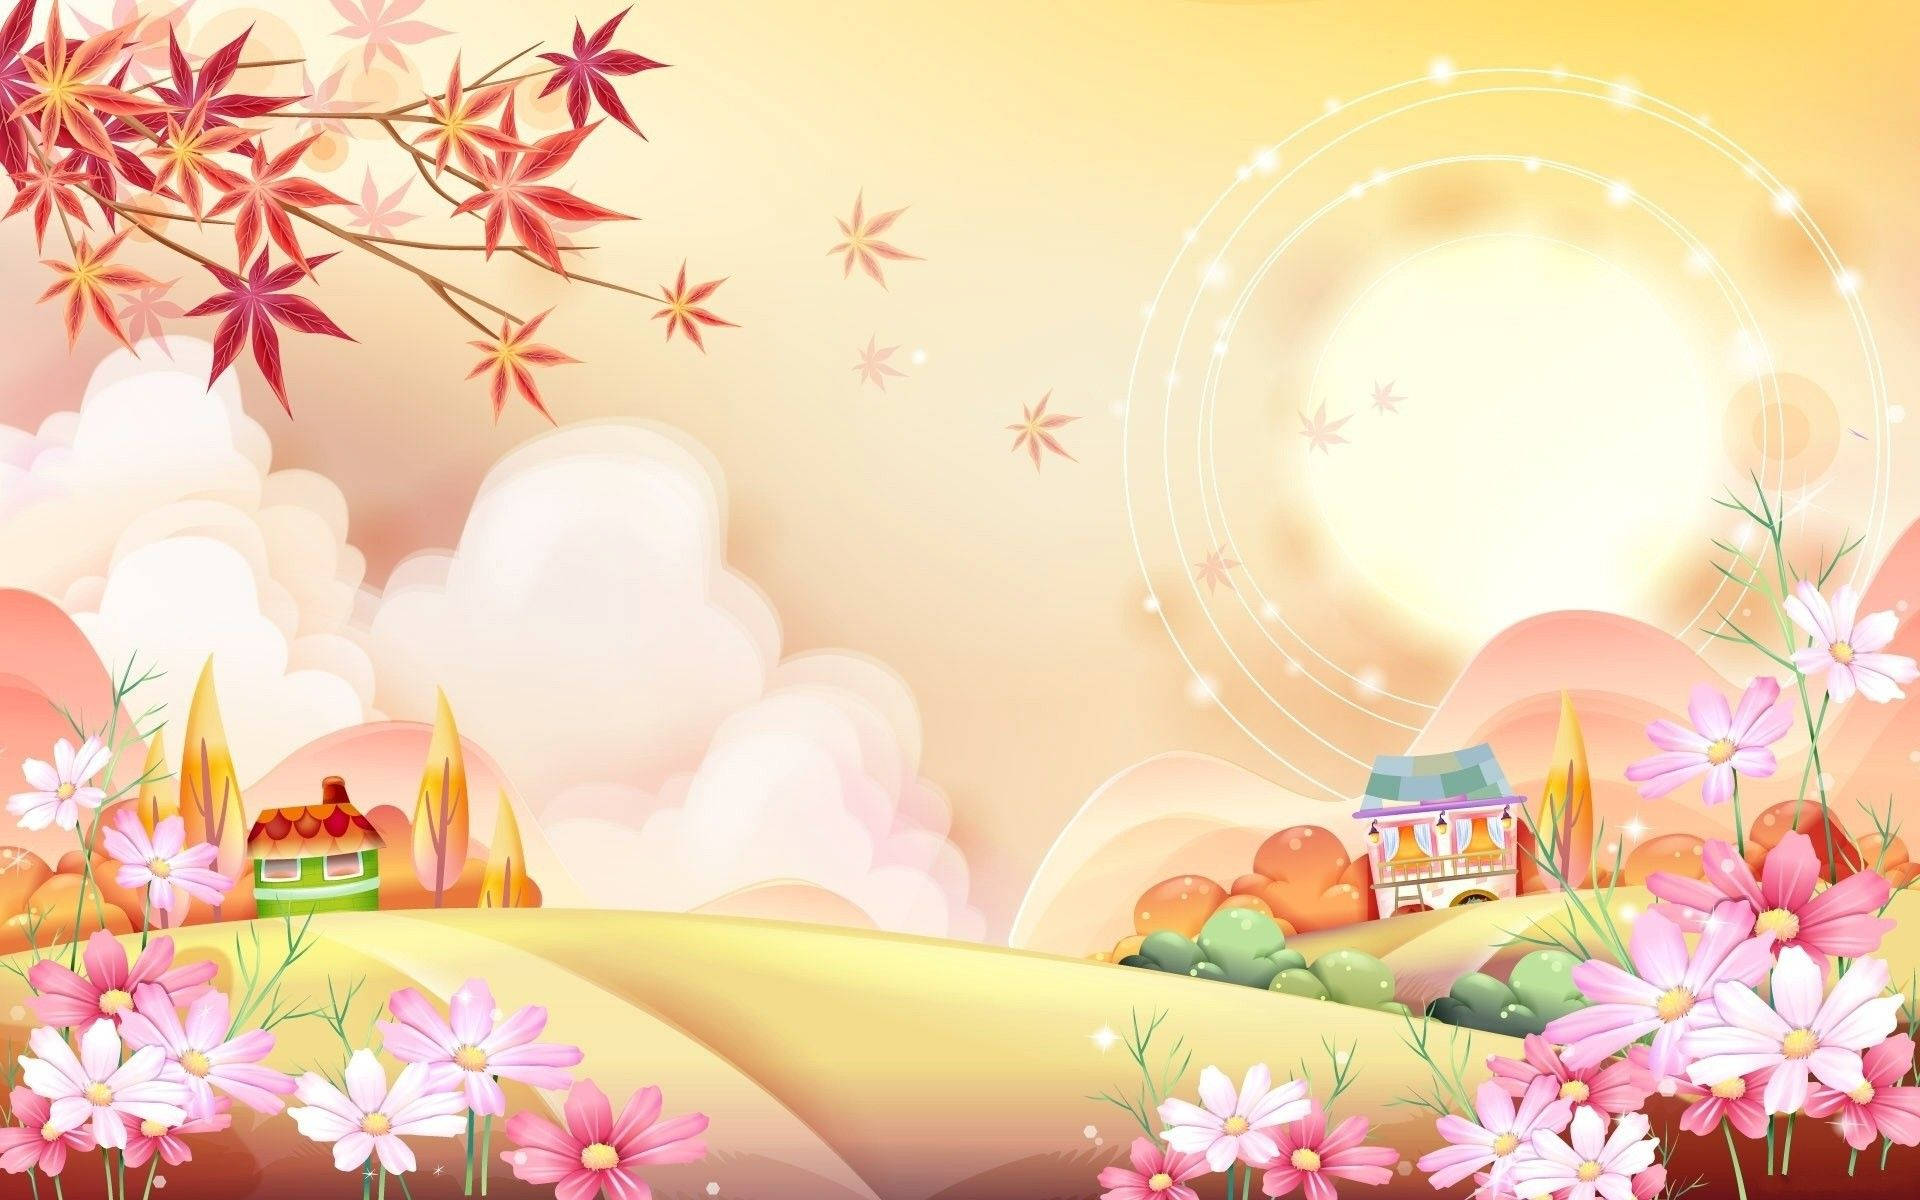 Cartoon houses on hills with flowers wallpaper.